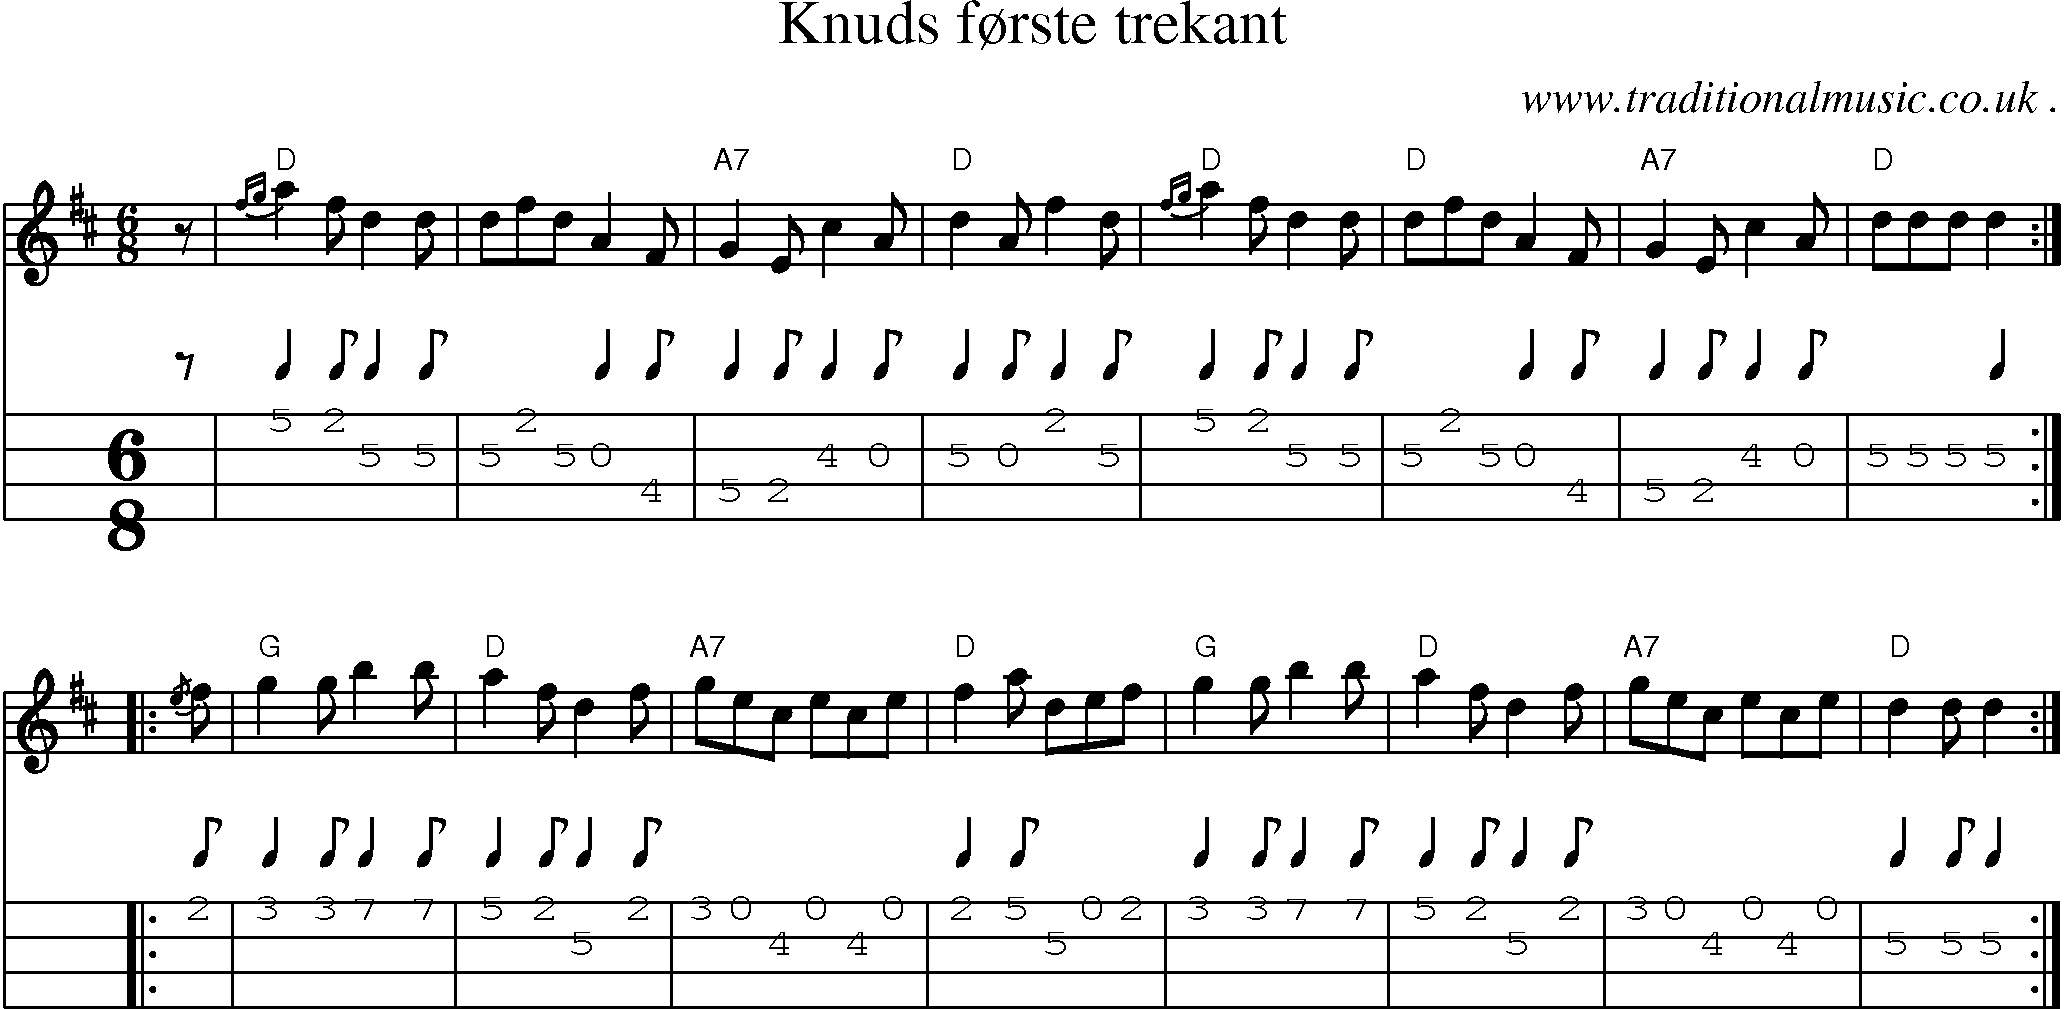 Sheet-music  score, Chords and Mandolin Tabs for Knuds Forste Trekant